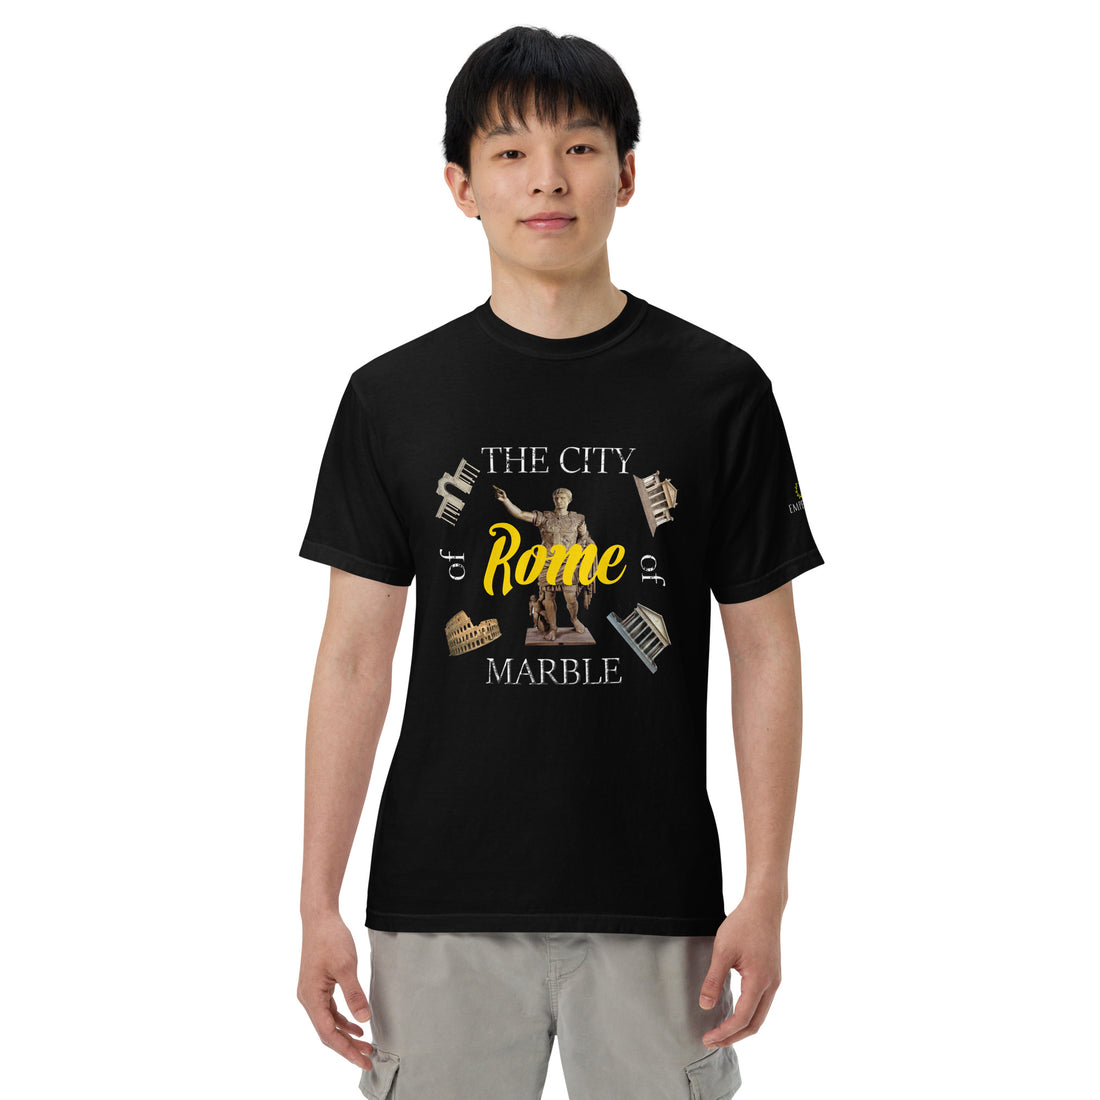 The City of Marble - Rome Architecture T-Shirt